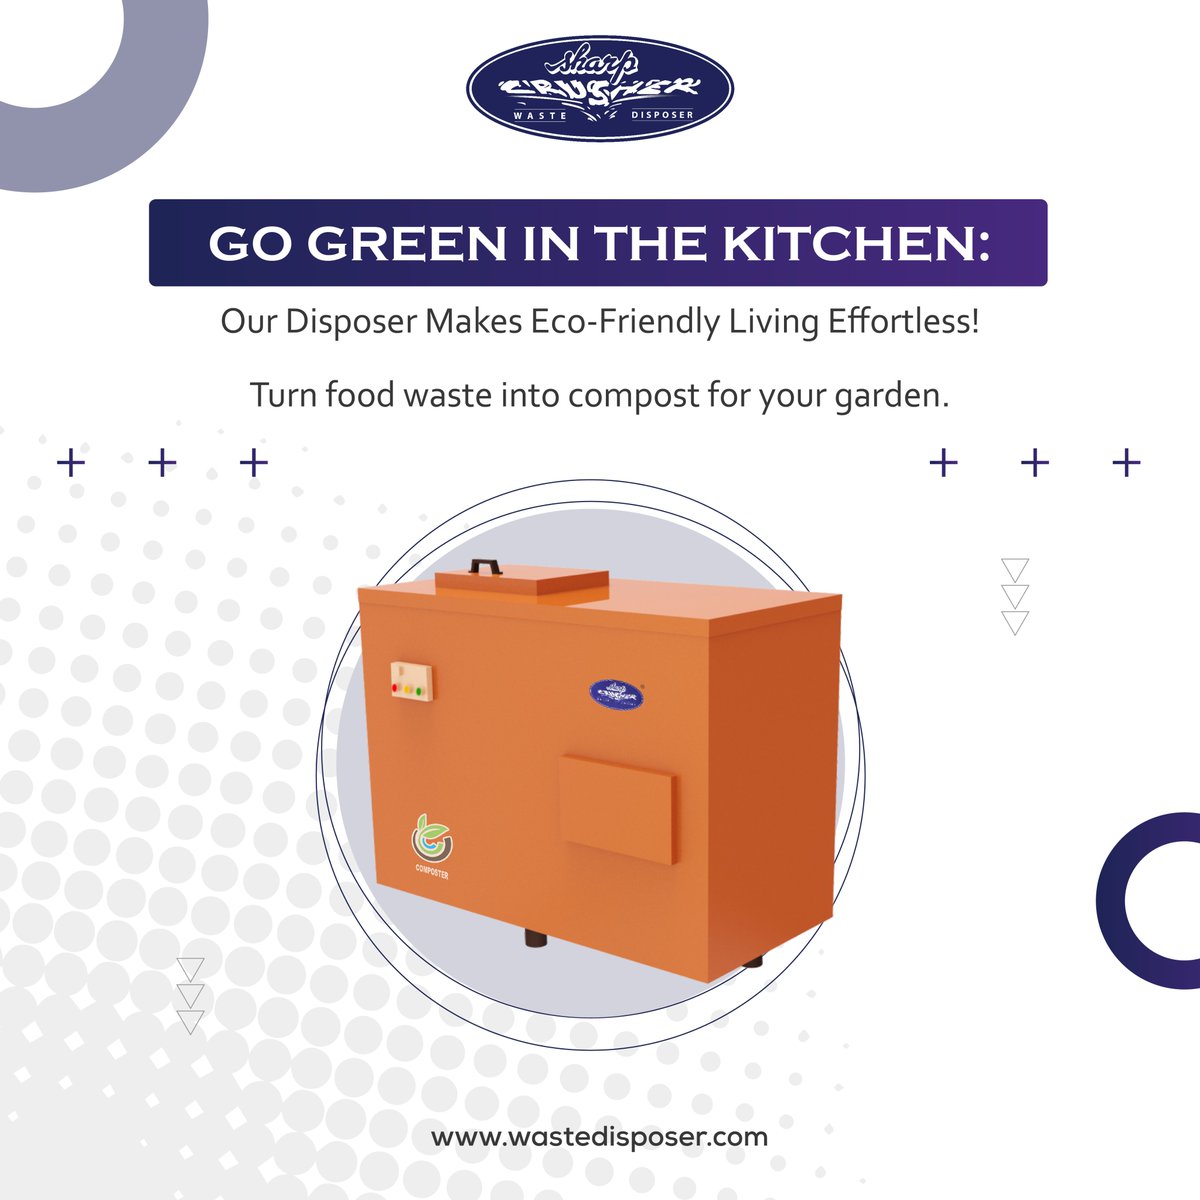 Upgrade to an #ecofriendly kitchen with #SharpCrusher's composters! 🌿♻️ Transform your #foodwaste into nutrient-rich #compost and reduce your environmental footprint. 

Explore our range at wastedisposer.com 

#WasteDisposer #kitchen #Composter #composite #OrganicWaste